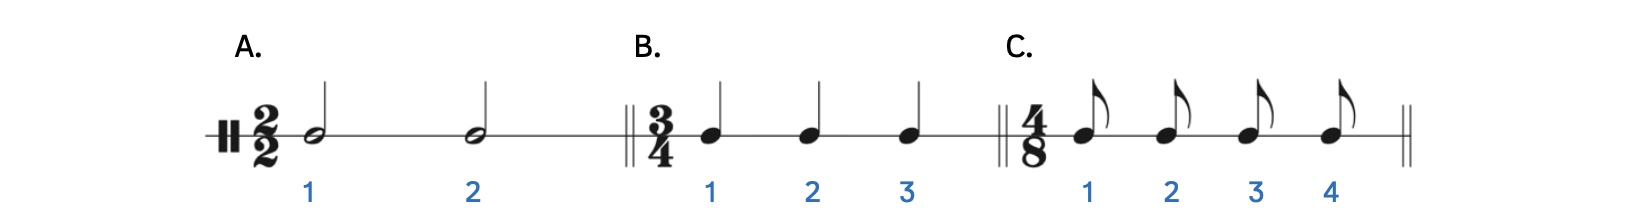 Simple time signatures. Example A shows the time signature 2-2, which has 2 beats per measure that you would count 1-2. Example B shows the time signature 3-4, which has 3 beats per measure that you would count 1-2-3. Example C shows the time signature 4-8, which has 4 beats per measure that you would count 1-2-3-4.